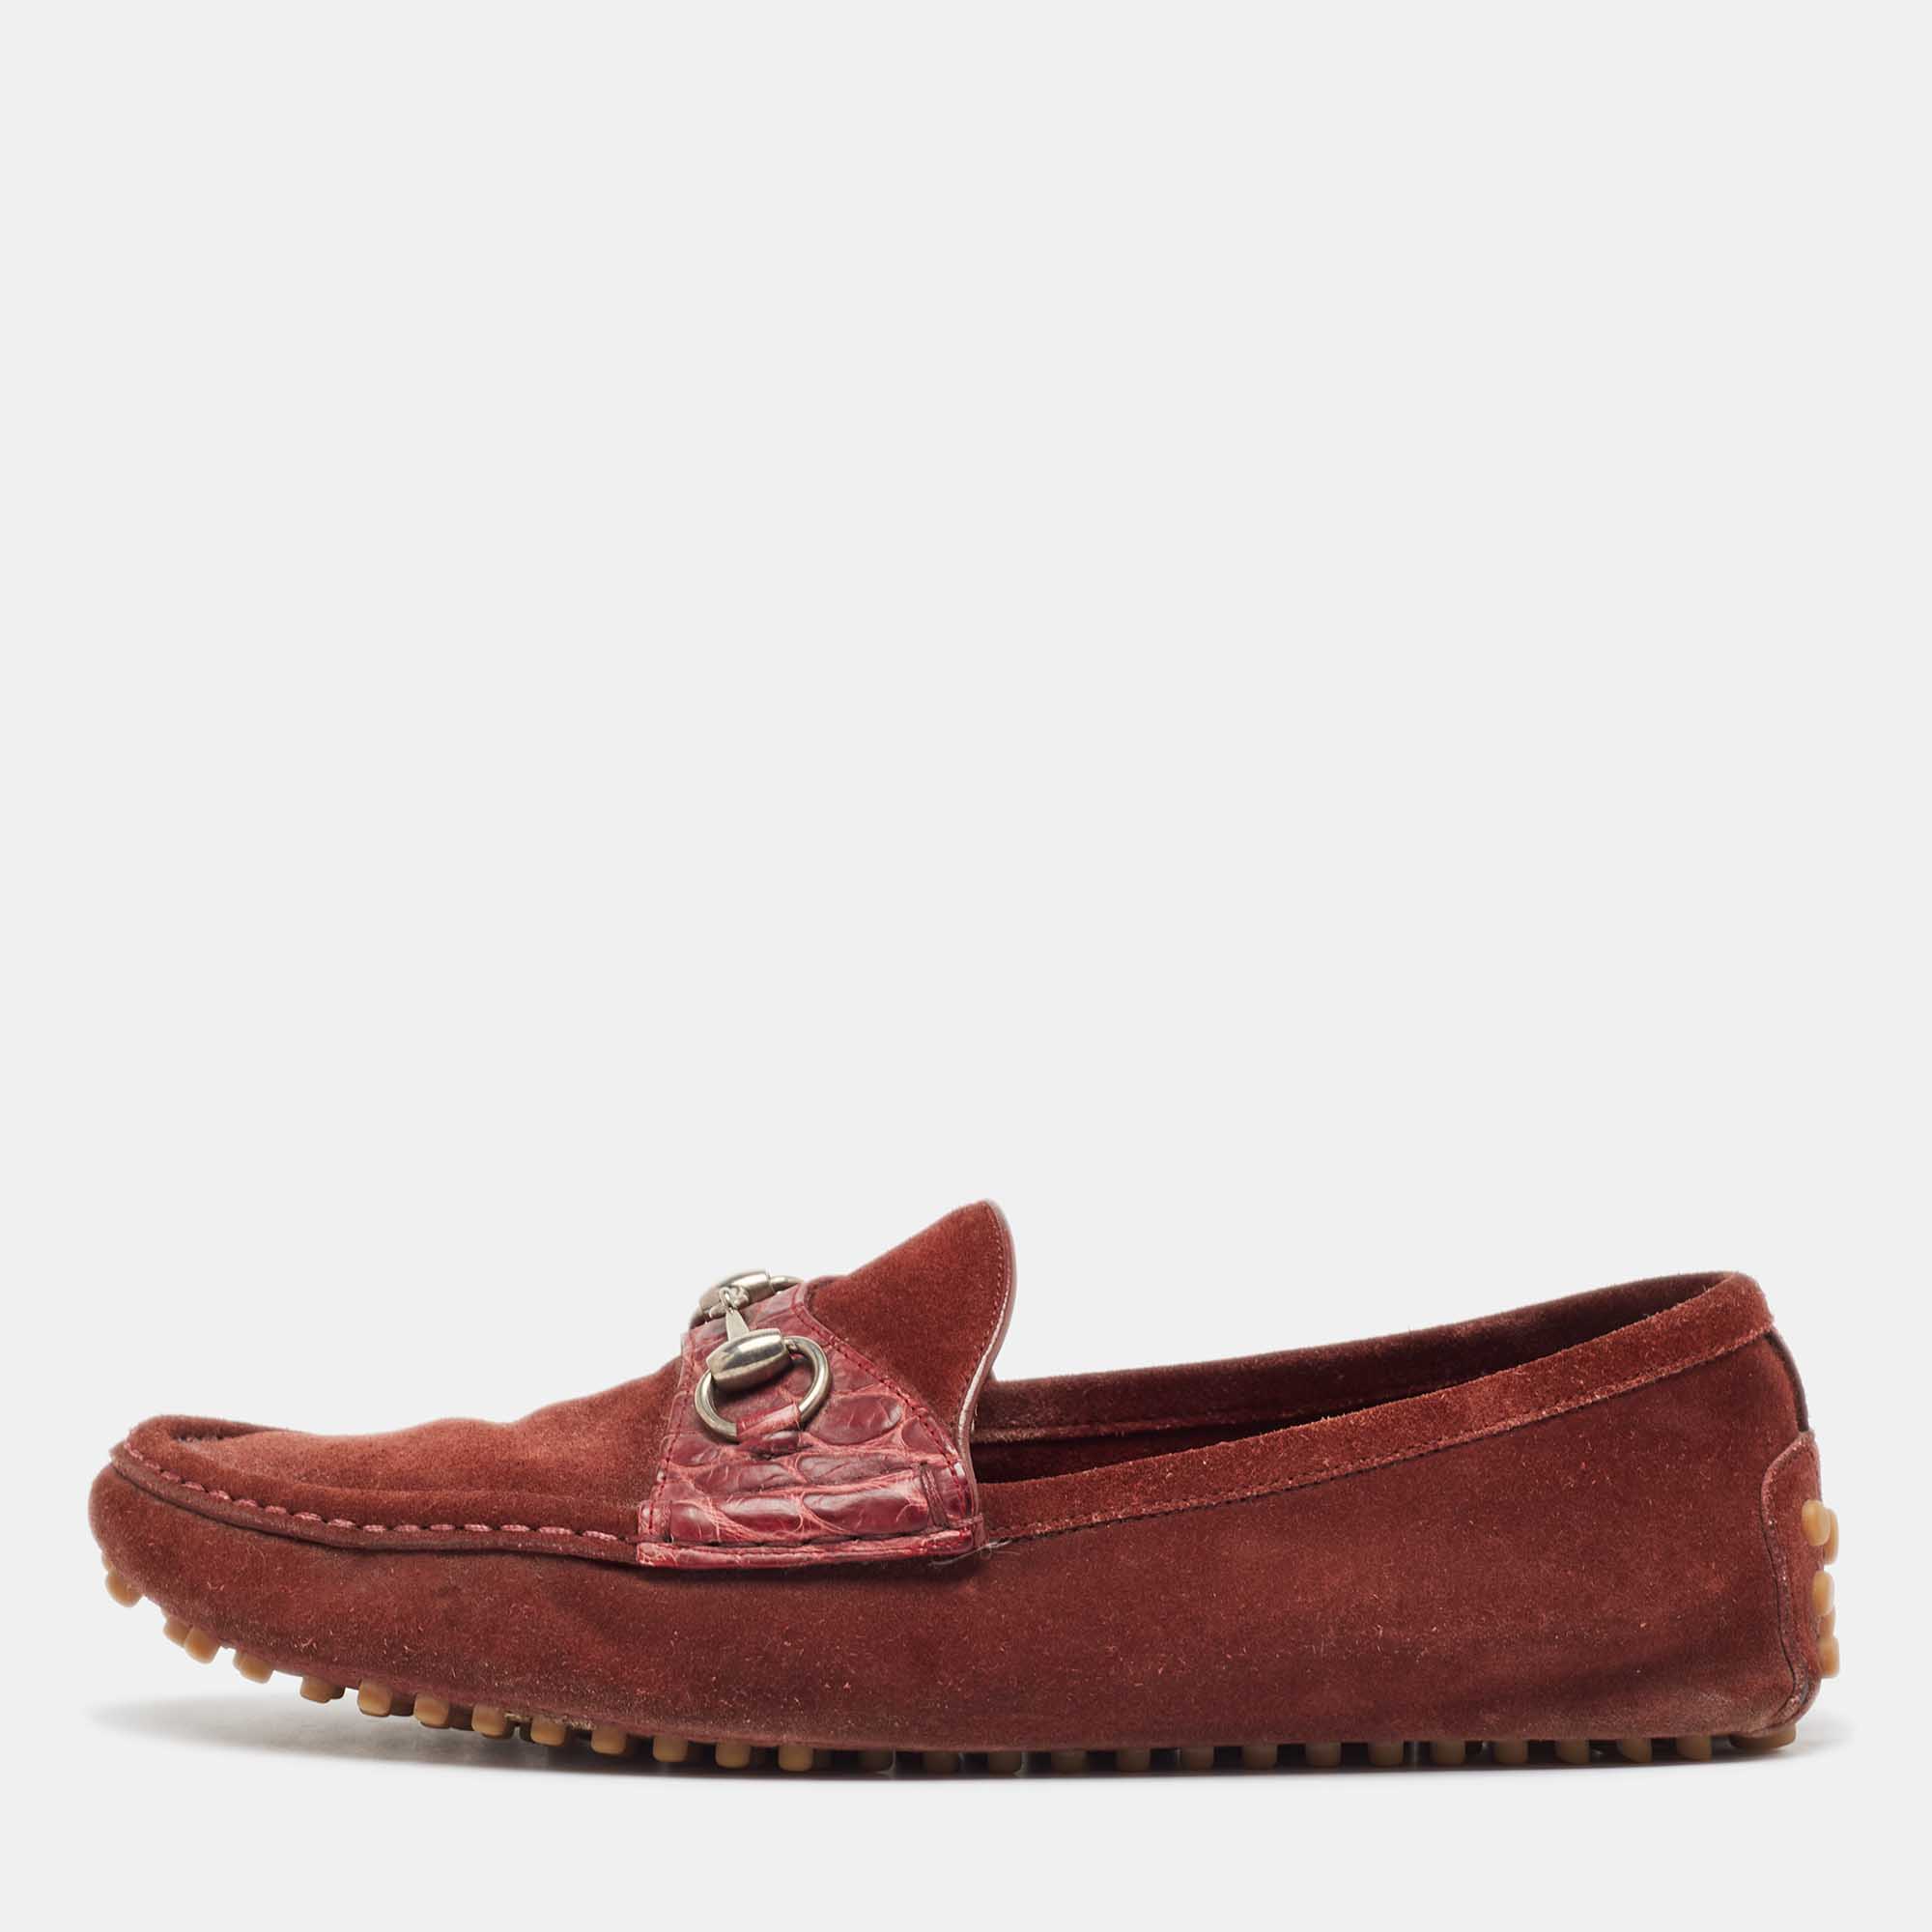 Gucci burgundy suede slip on loafers size 43